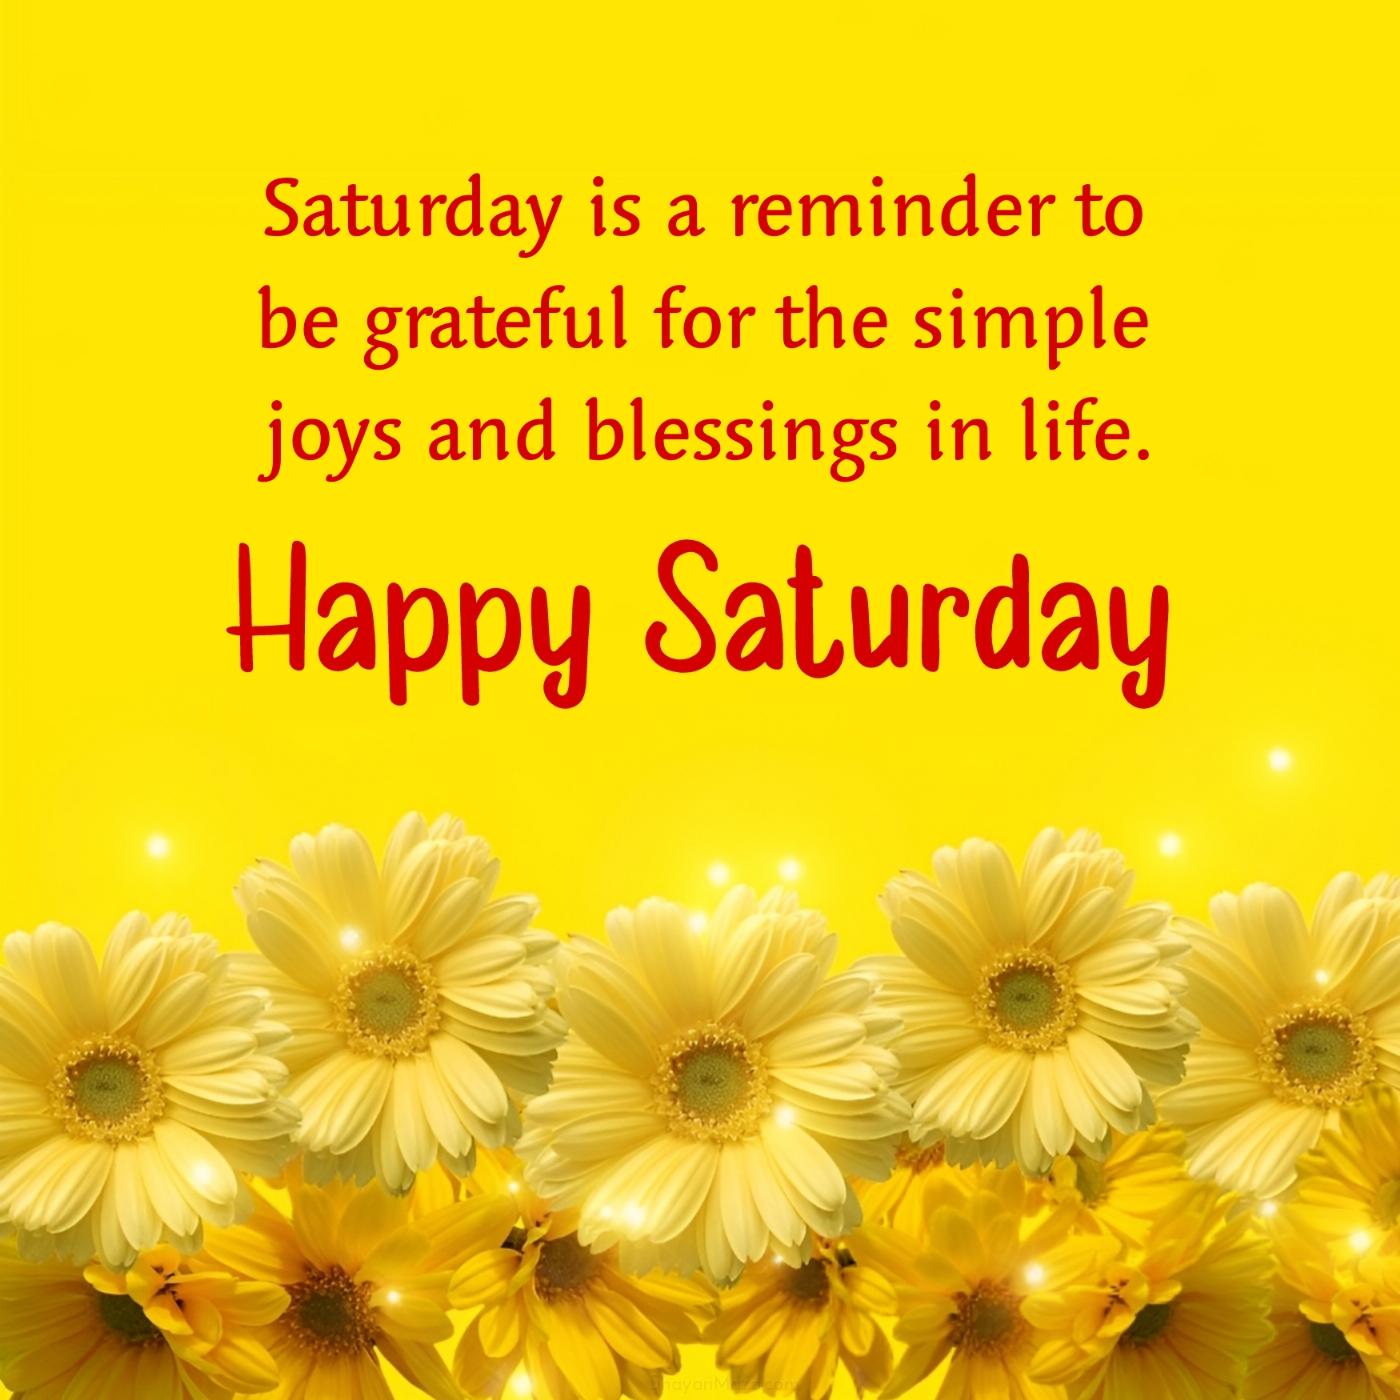 Saturday is a reminder to be grateful for the simple joys